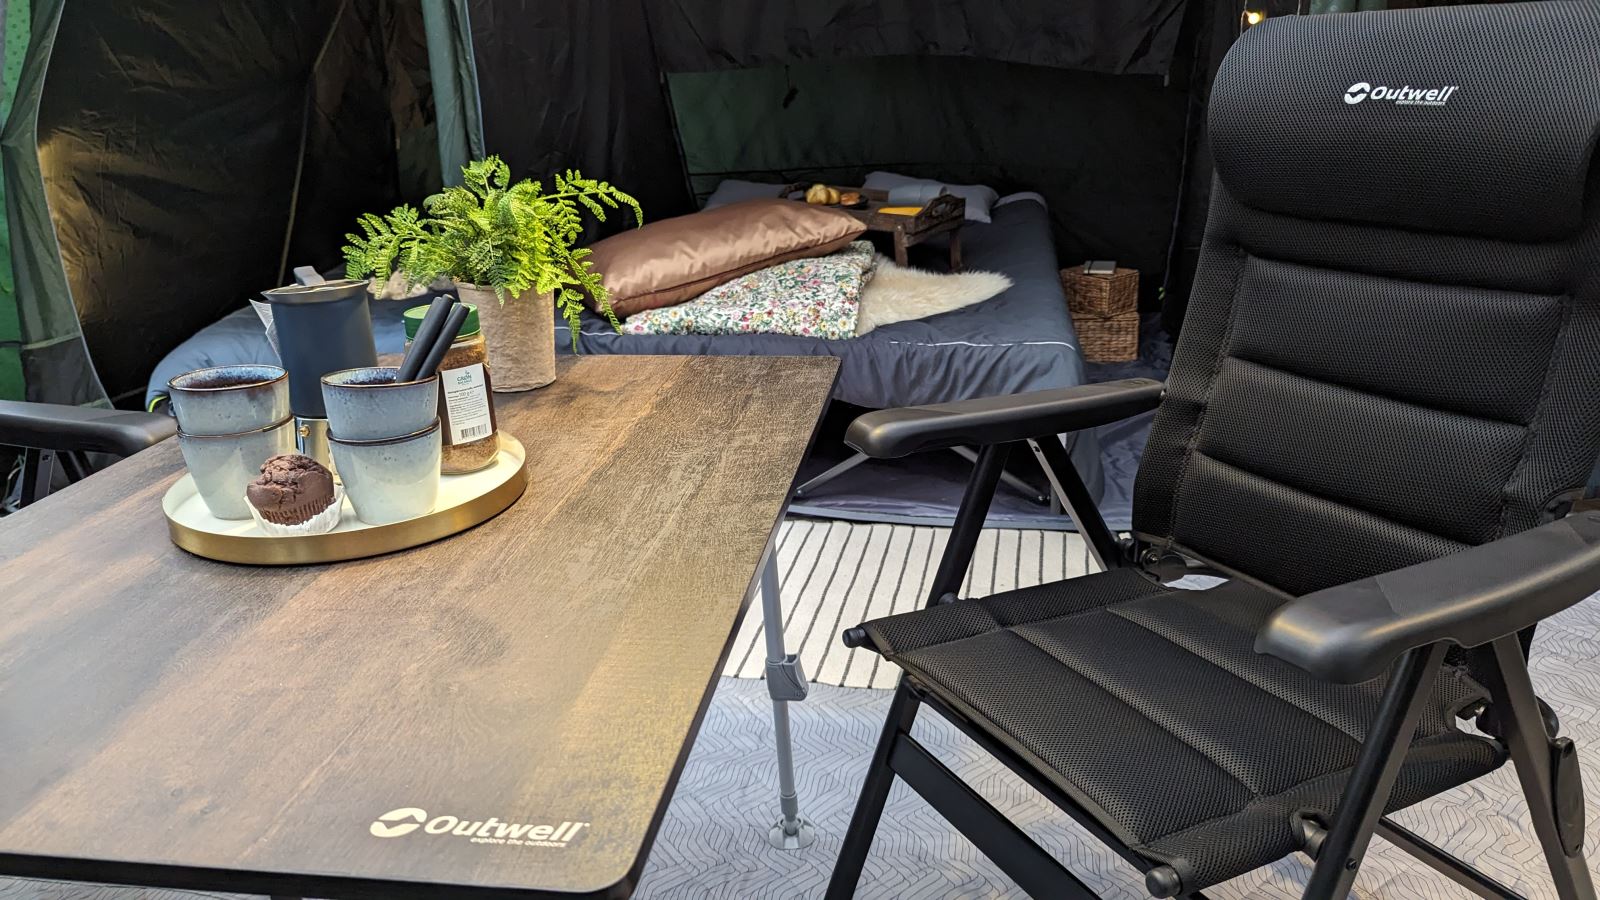 An Outwell camping table